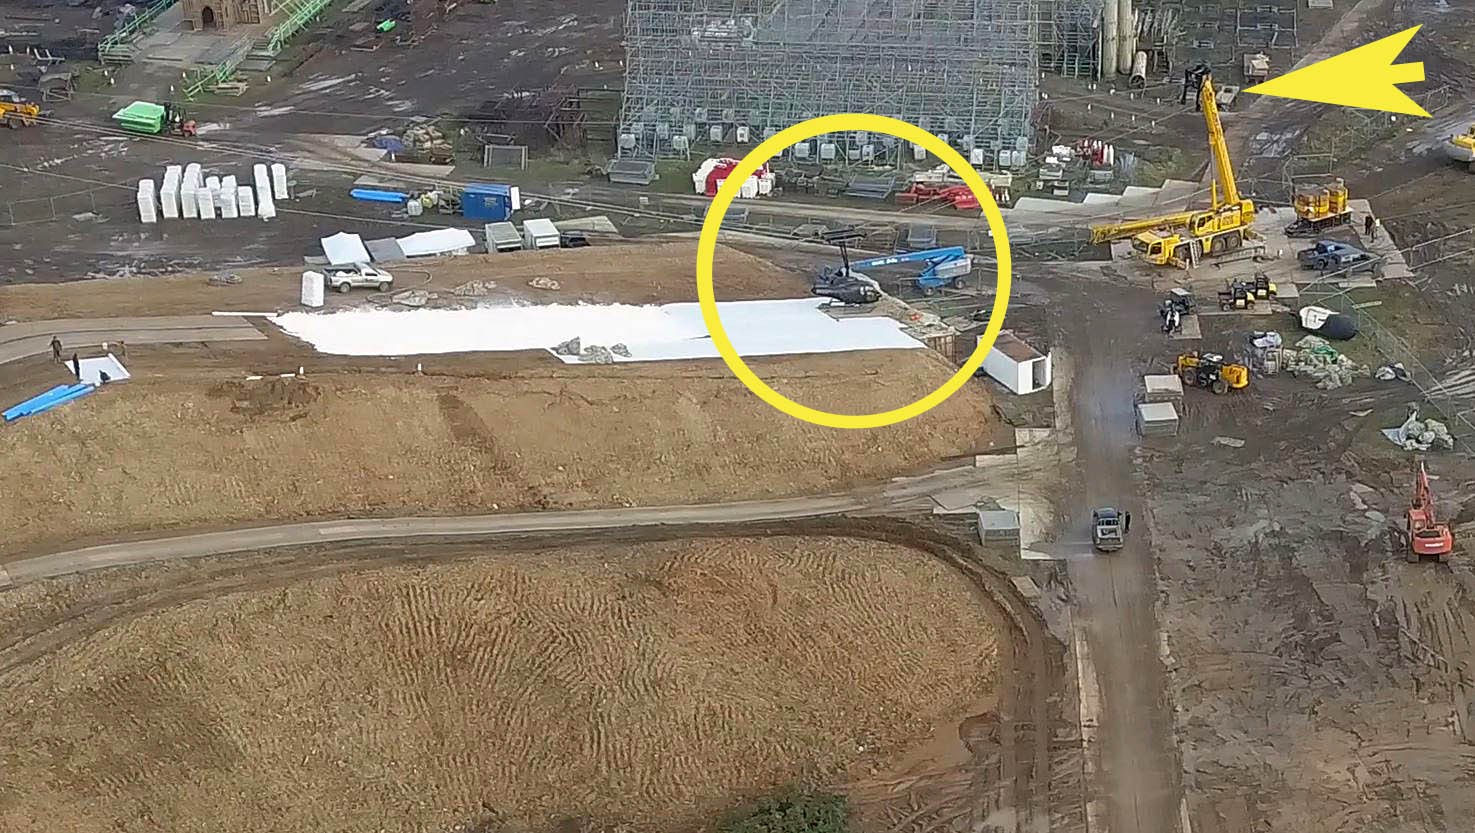 Mission Impossible Fallout Helicopter Lands at NEW Warner Harry Potter Studio Tour